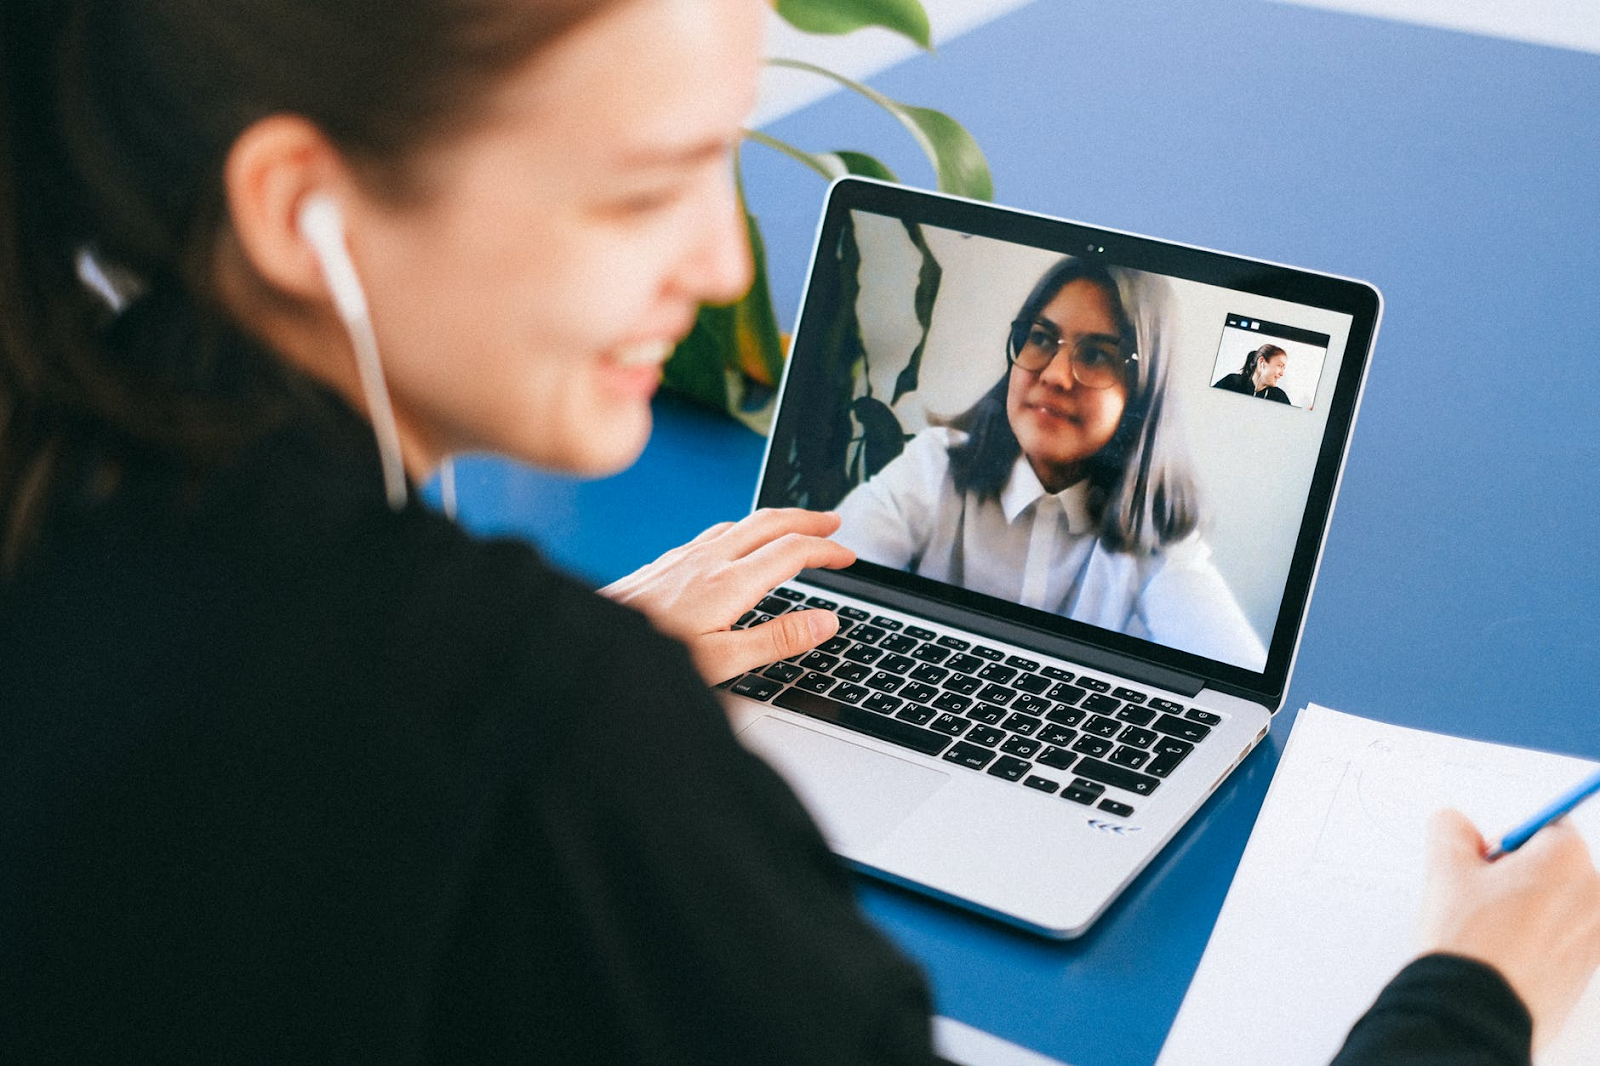 A woman chats and laughs with her friend through a video call on her laptop